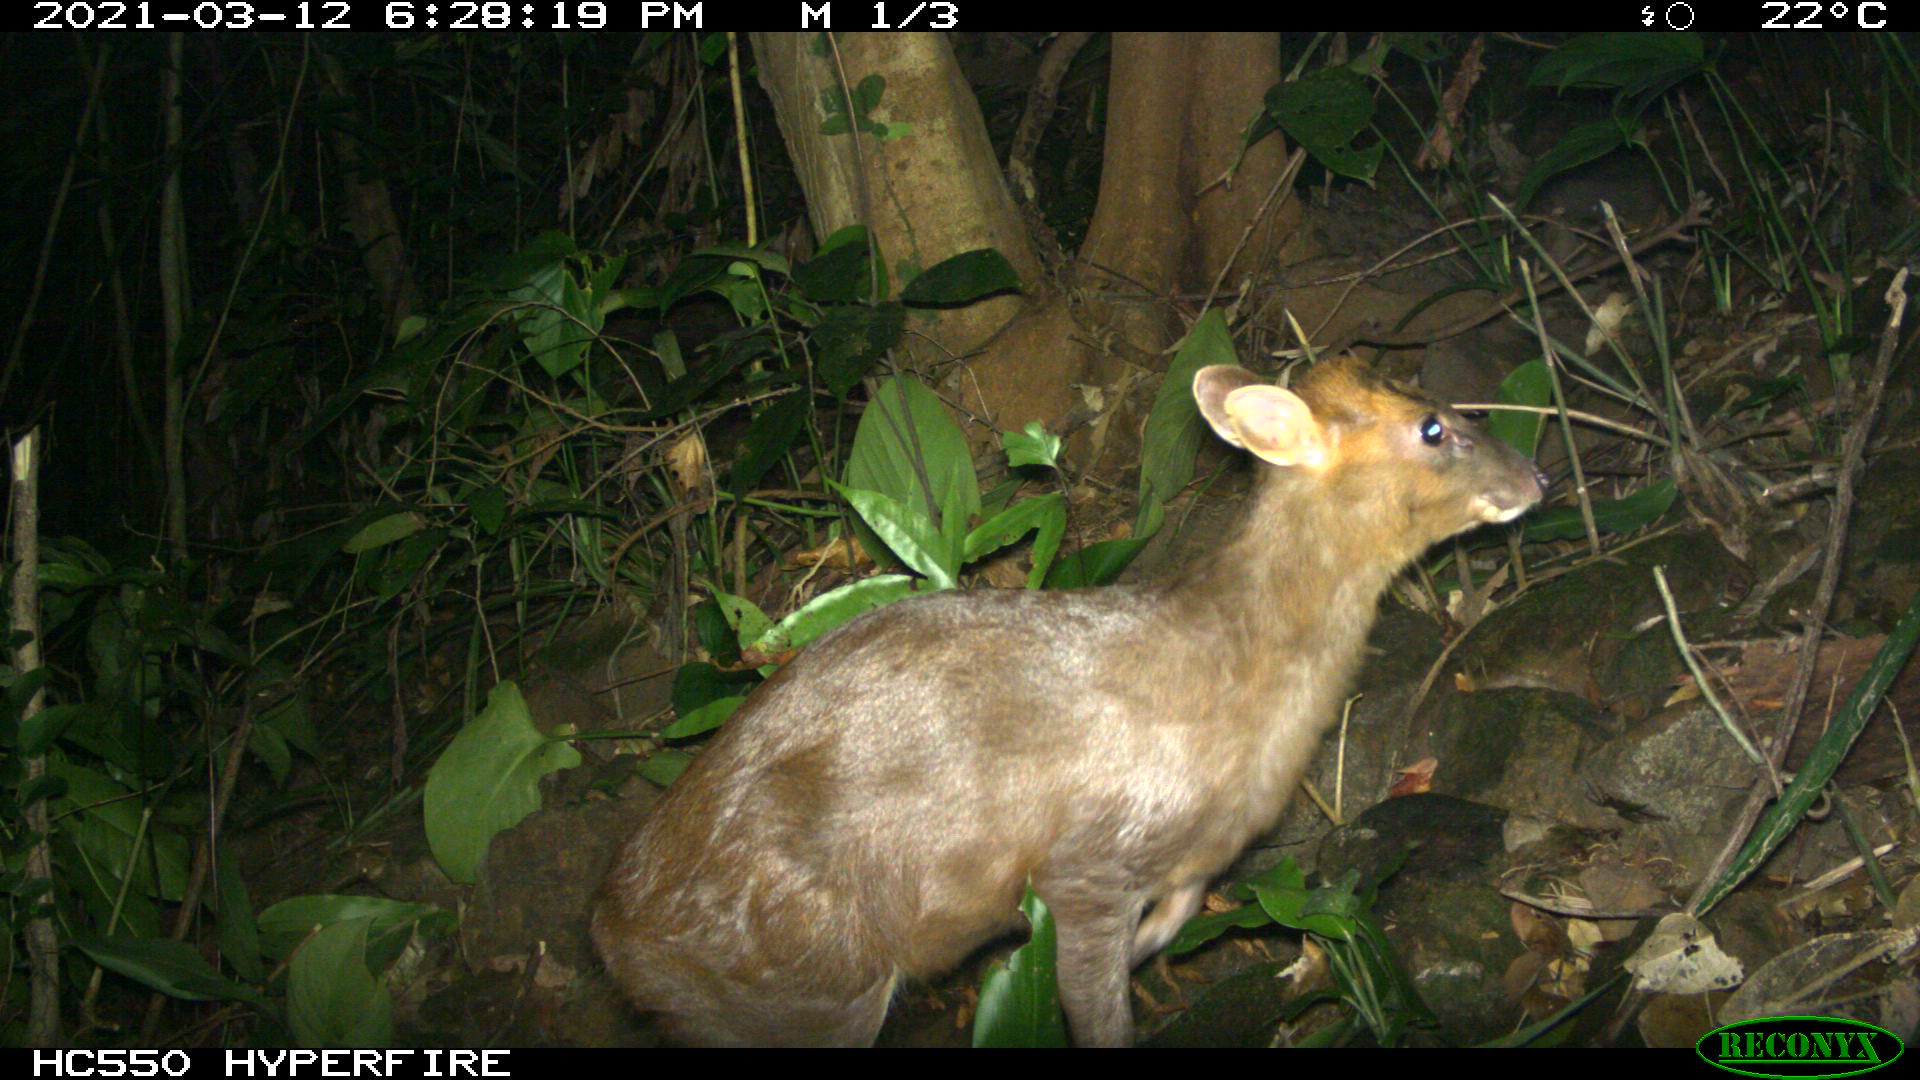 The Truong Son muntjac, or Annamite muntjac, (Muntiacus truongsonensis) was captured on camera on March 12, 2021 in this photo supplied by the Phong Dien Animal Sanctuary